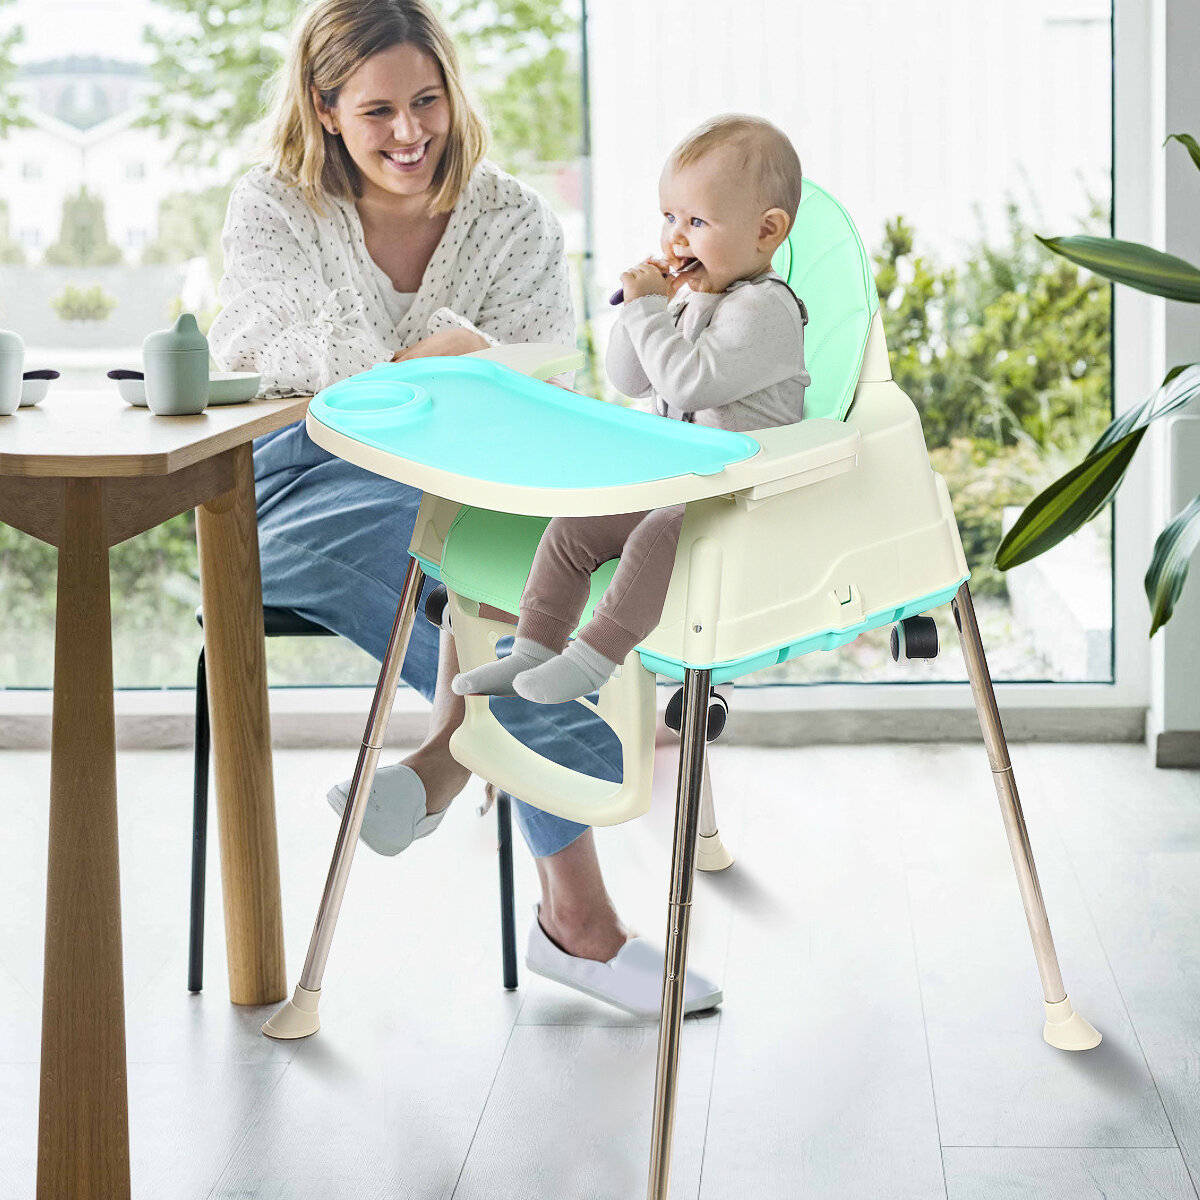 best price,children,dining,chair,baby,eating,table,eu,discount